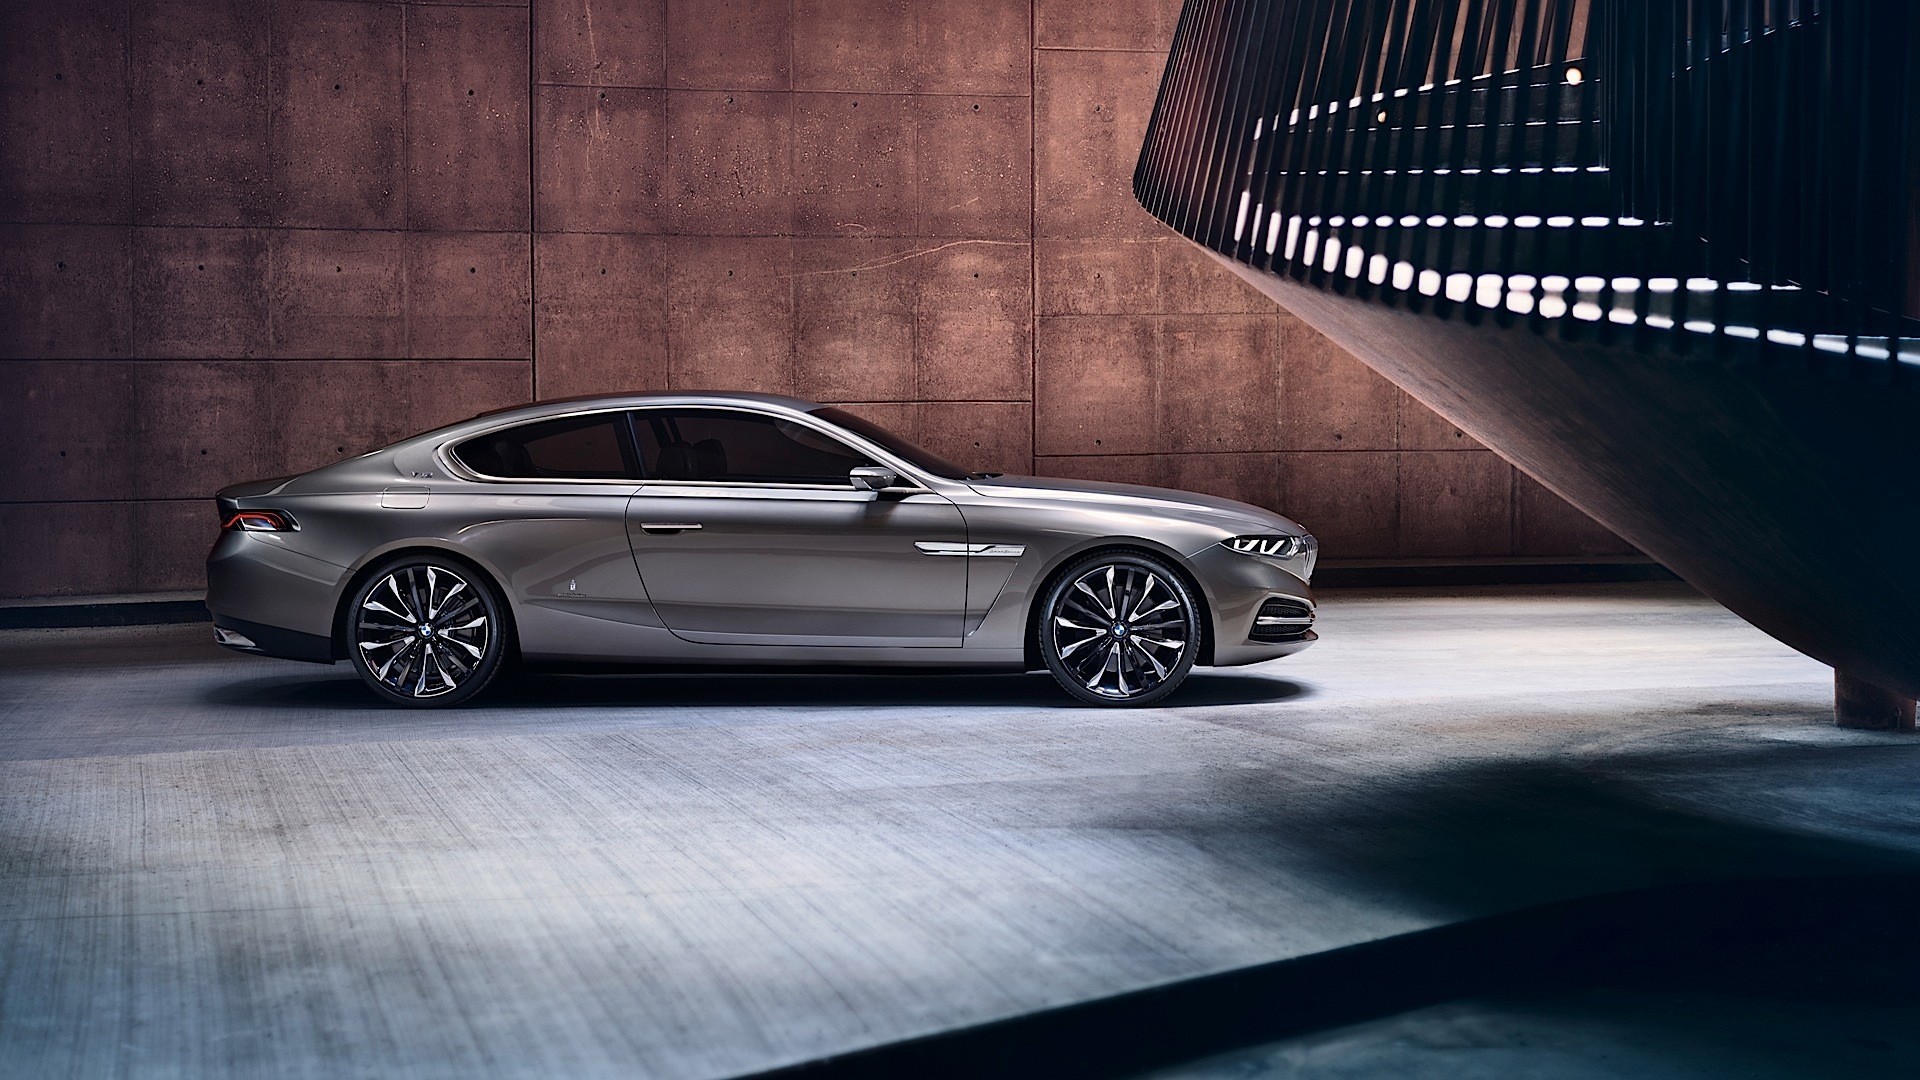 General 1920x1080 car BMW coupe luxury cars modern wall stairs BMW Vision hybrid (car) German cars concept cars